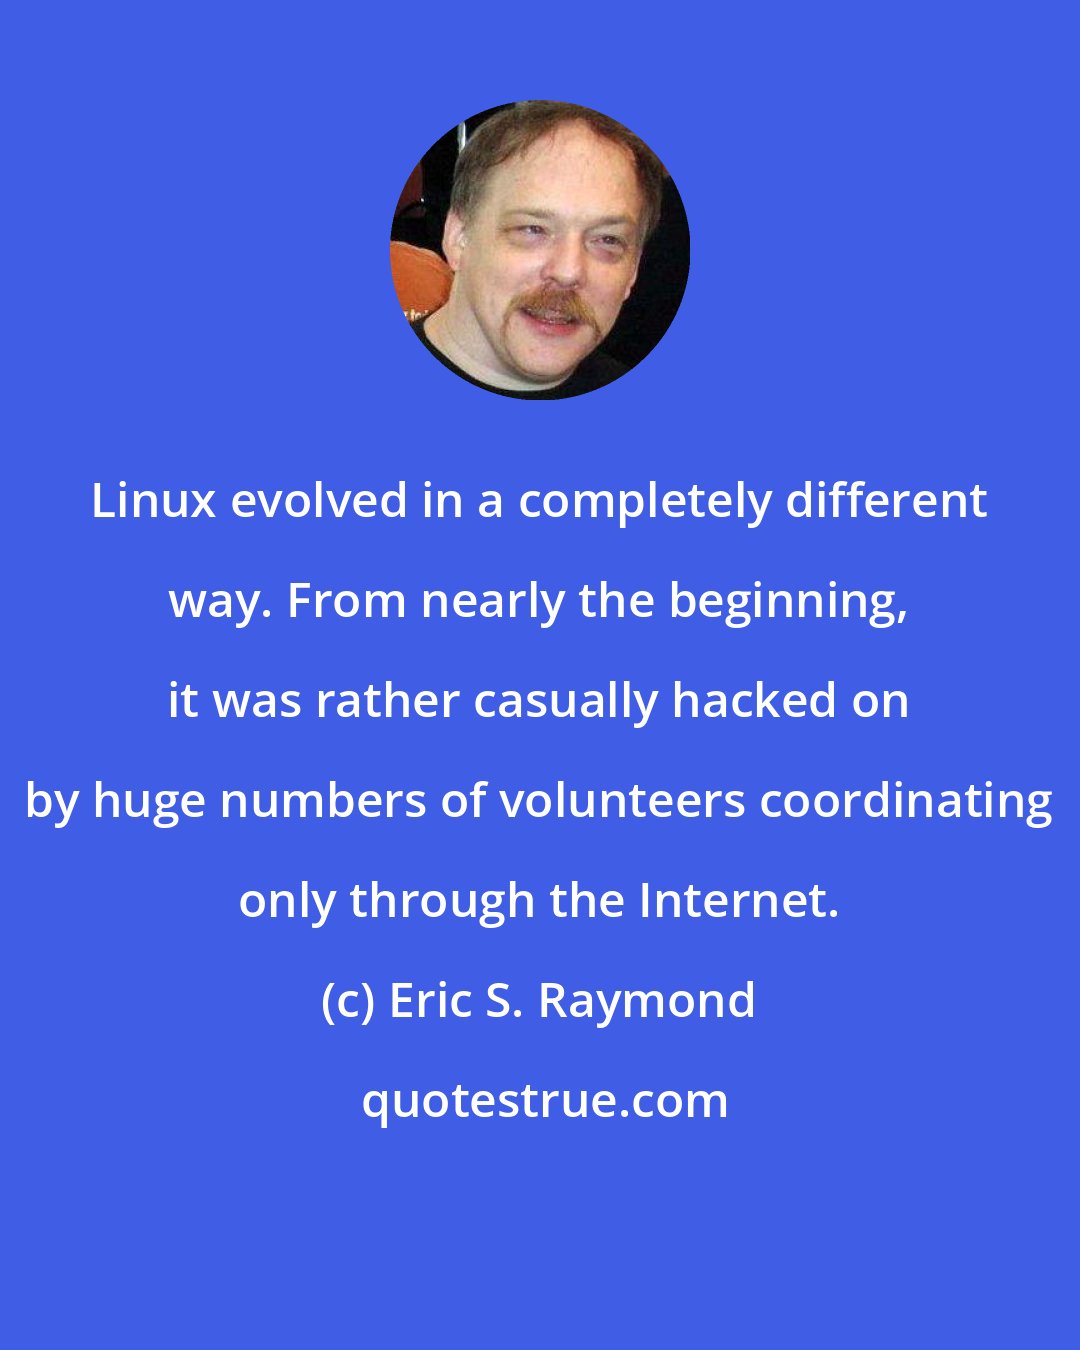 Eric S. Raymond: Linux evolved in a completely different way. From nearly the beginning, it was rather casually hacked on by huge numbers of volunteers coordinating only through the Internet.